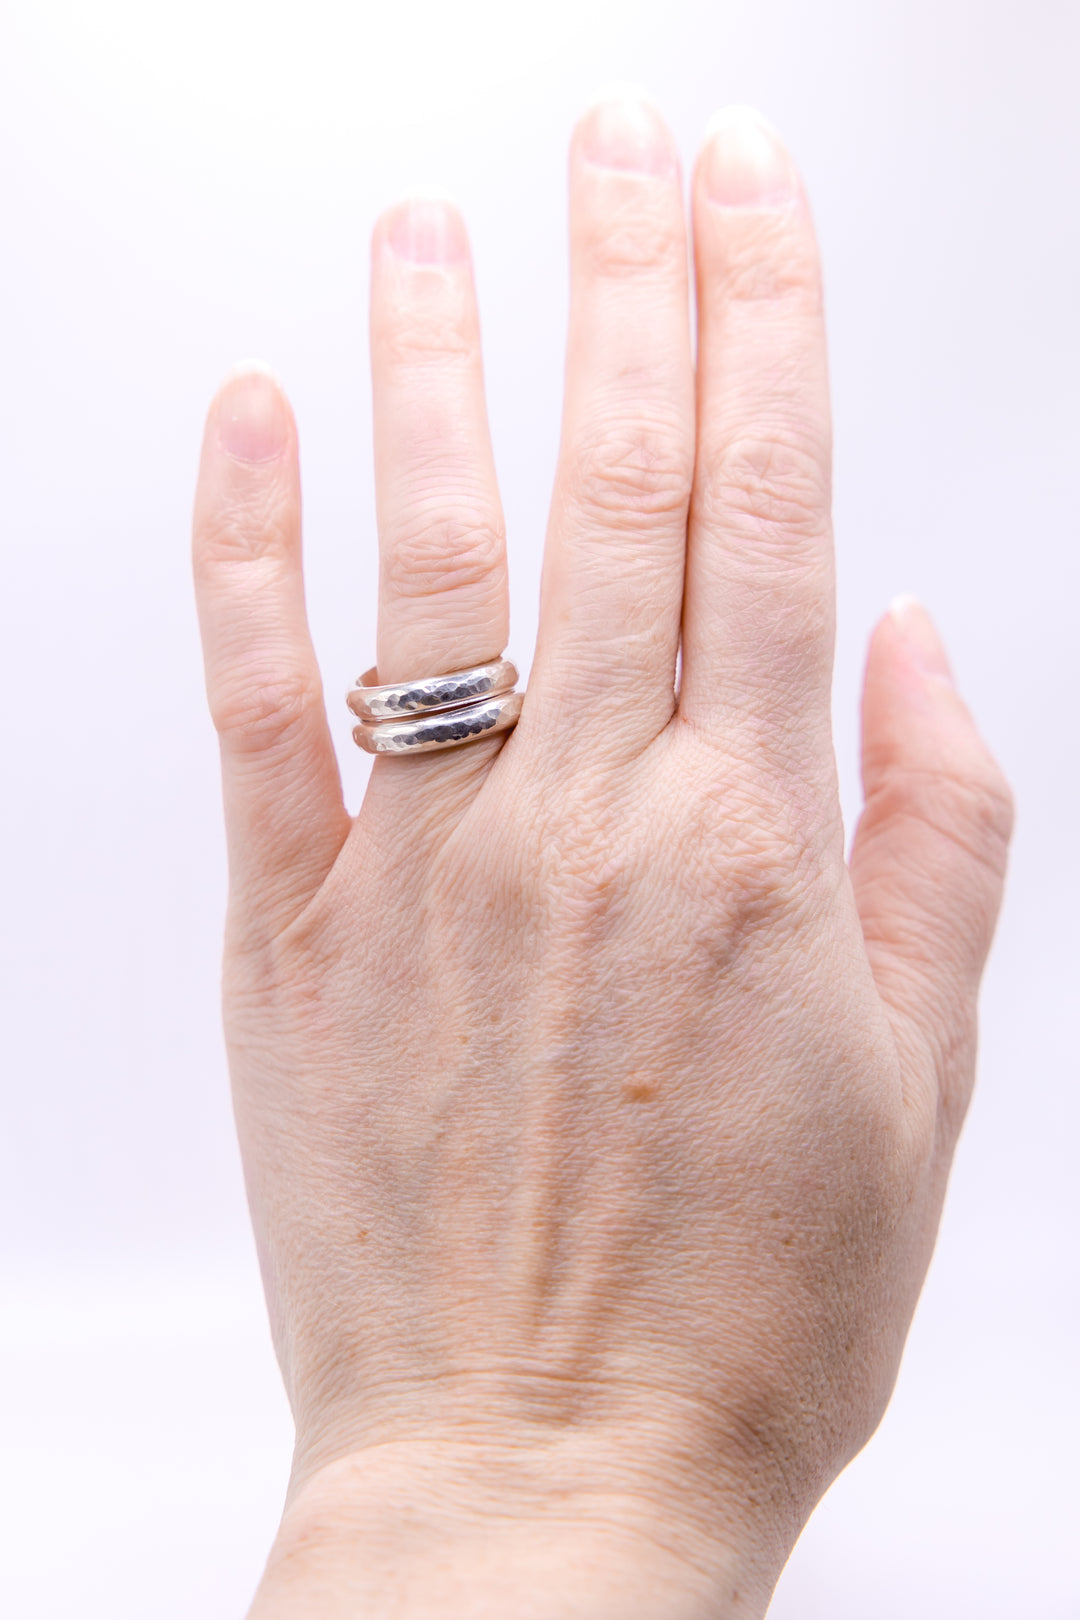 Silver hammered ring in Lexington, Kentucky by Anna Shae Jewelry 